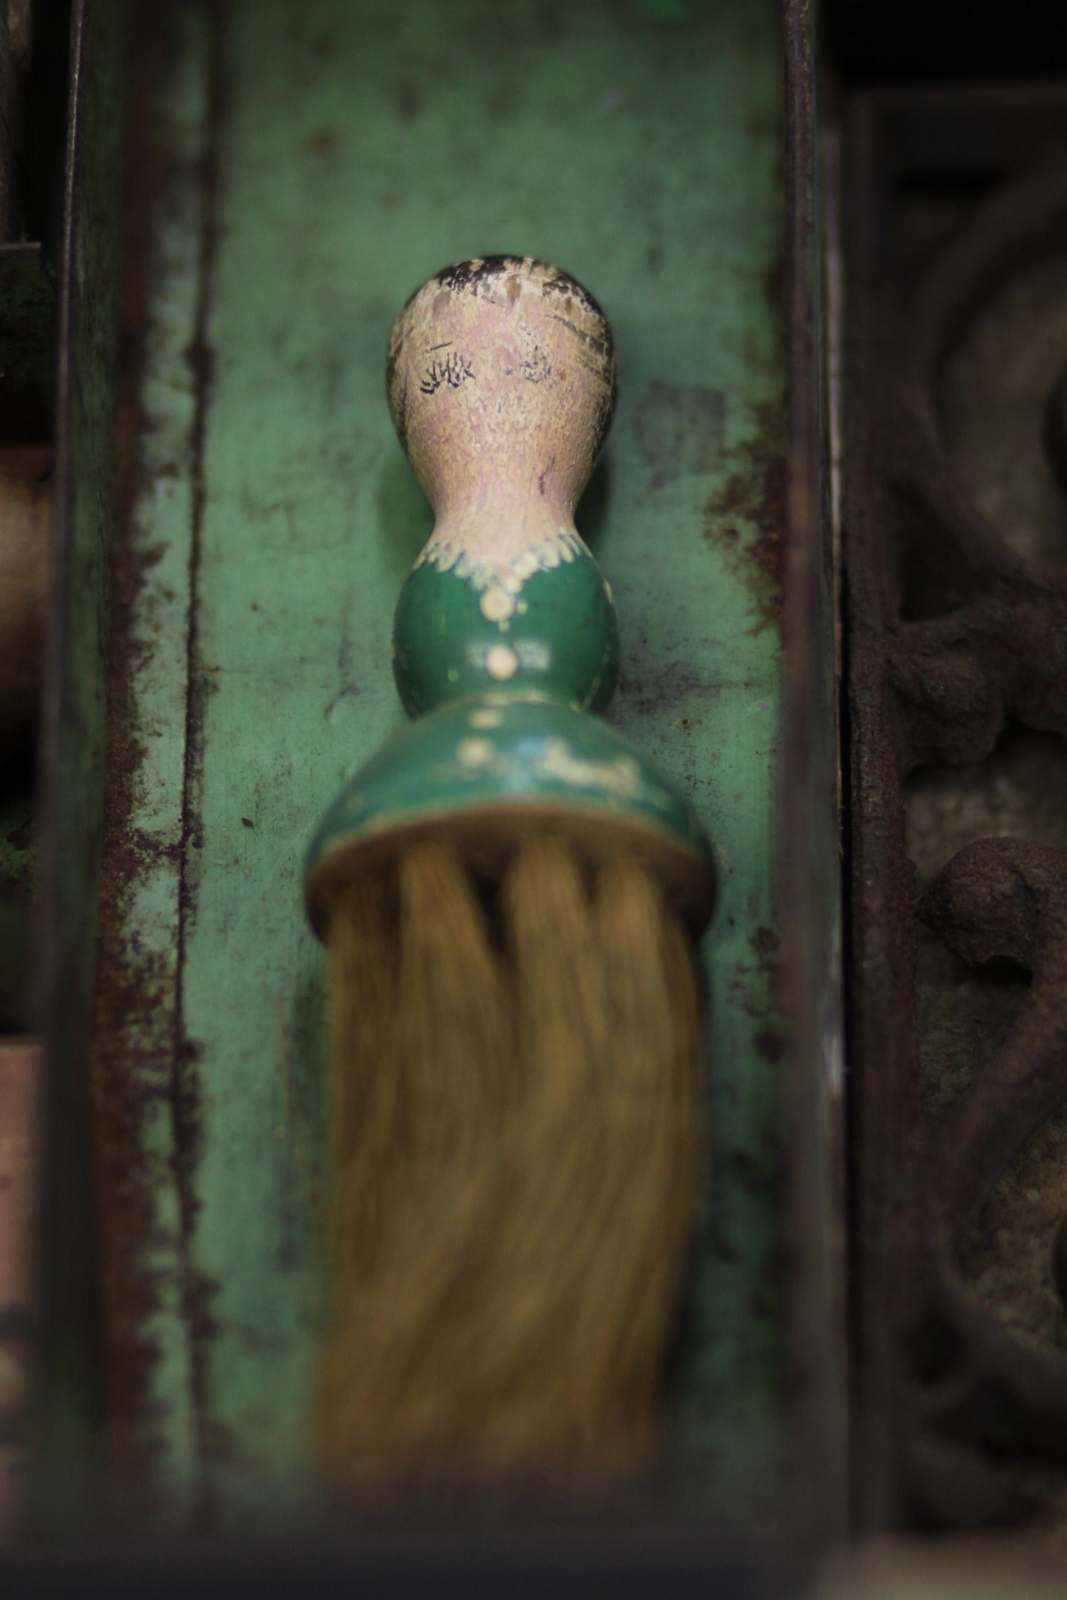 a green and white object with a face on it